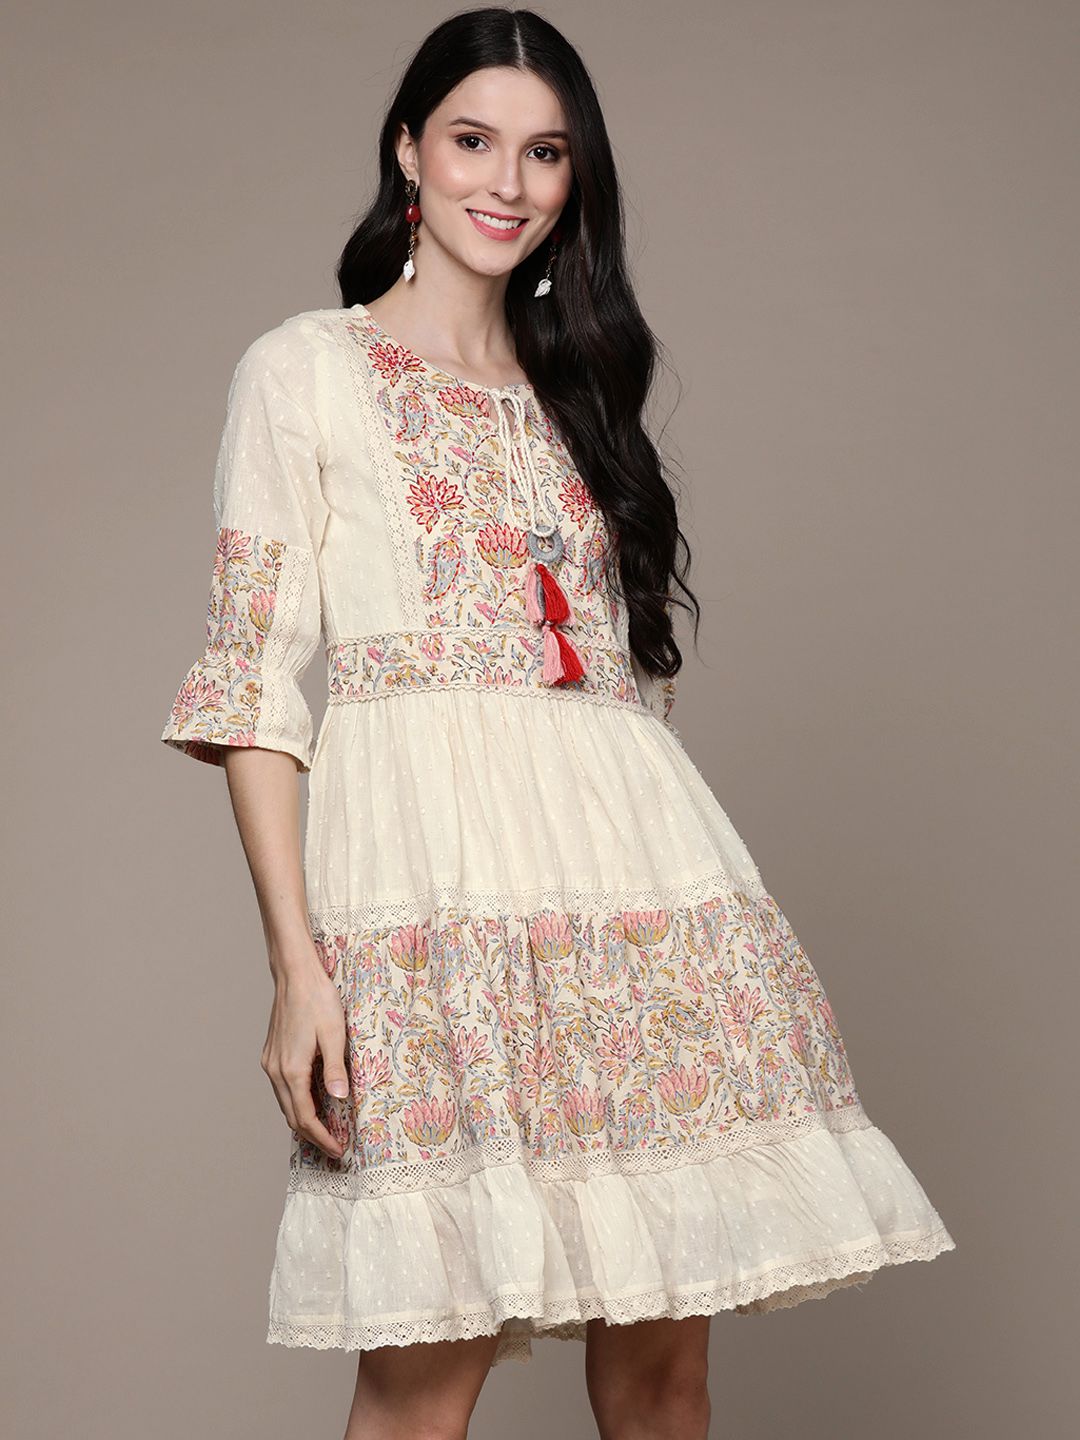 Ishin Cream-Coloured & Pink Floral Tie-Up Neck A-Line Dress Price in India